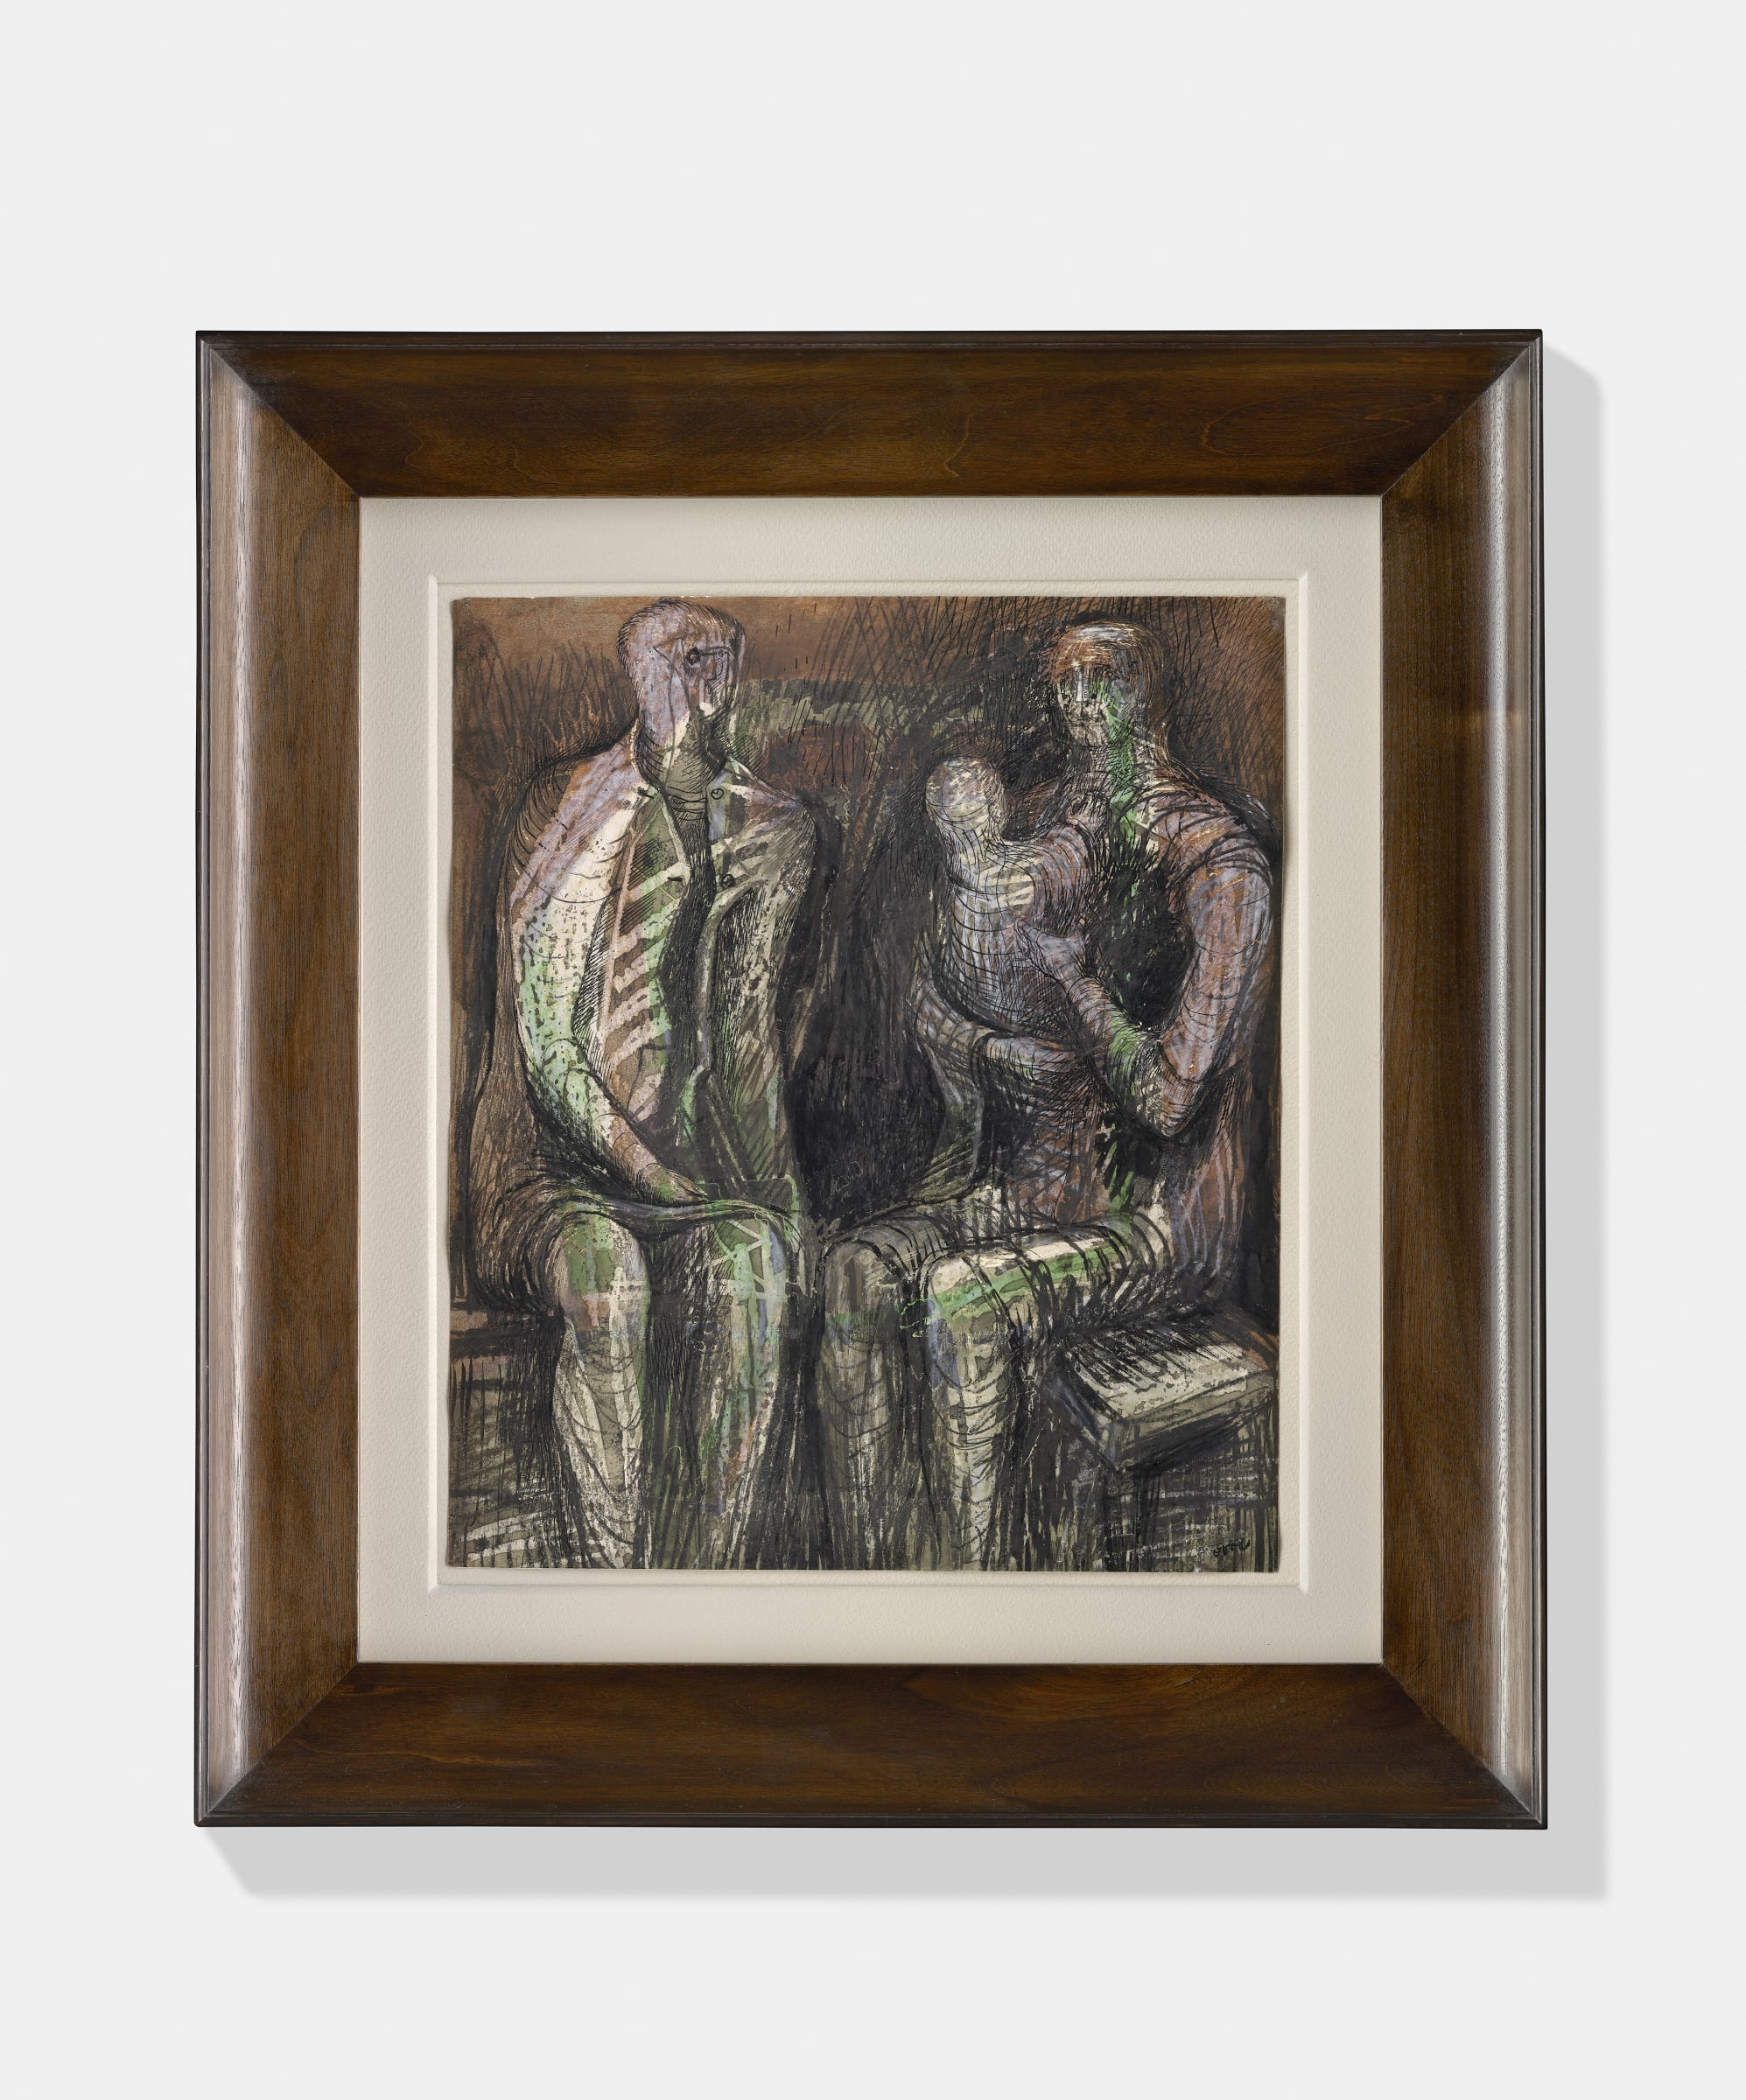 Henry Moore, Shelterers, c.1940-41 | Offer Waterman